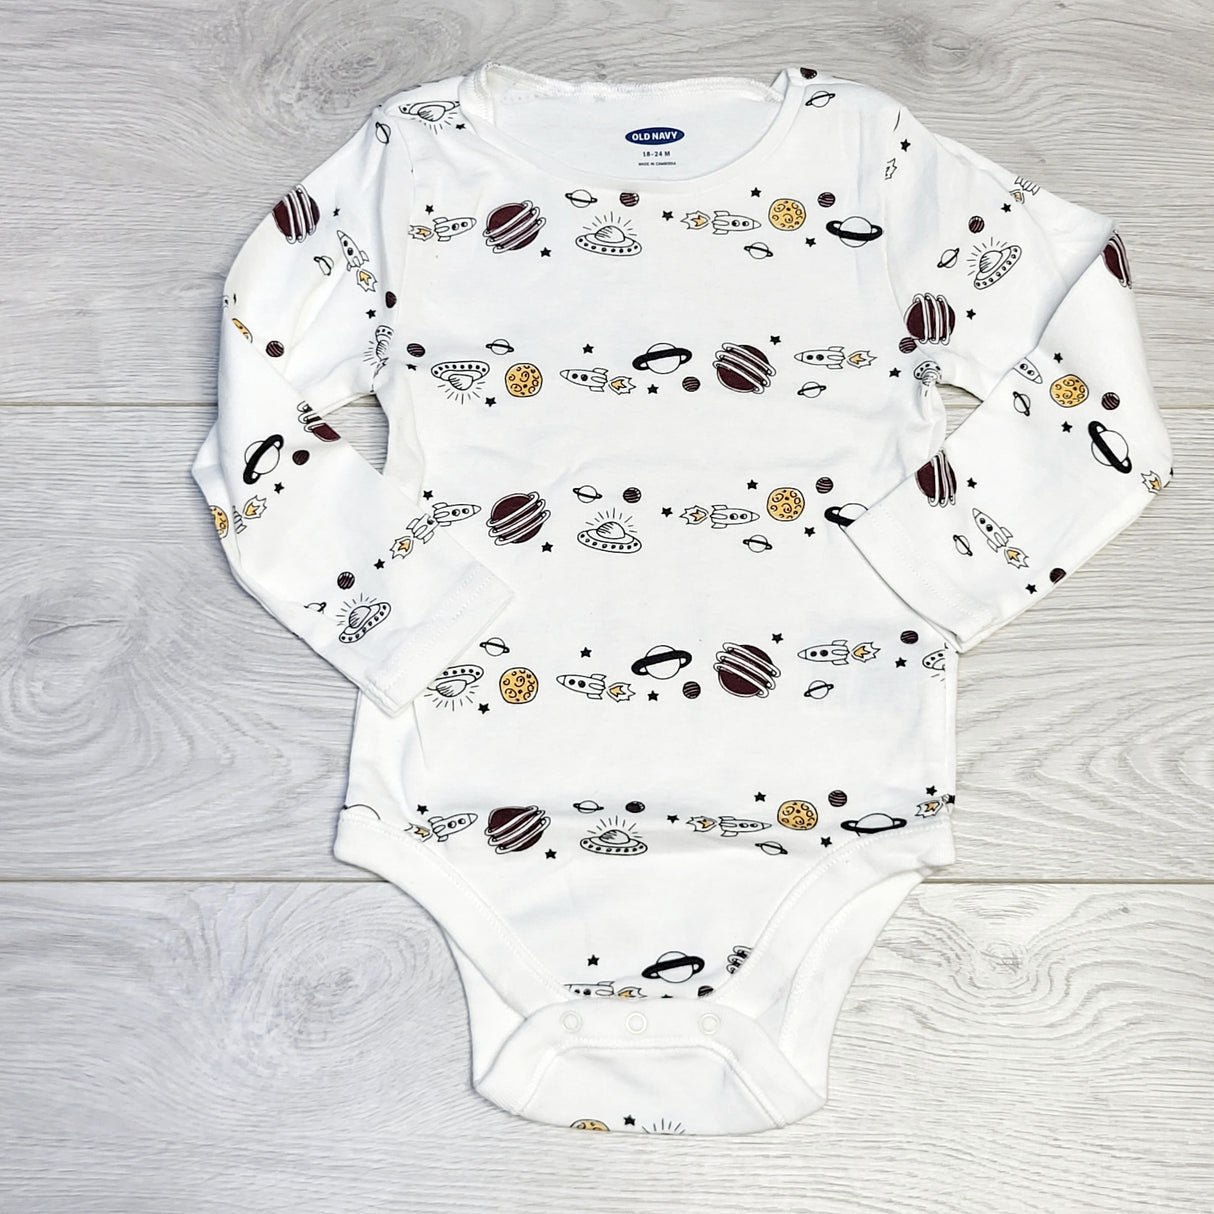 RAJ2 - Old Navy white onesie with planets, size 18-24 months